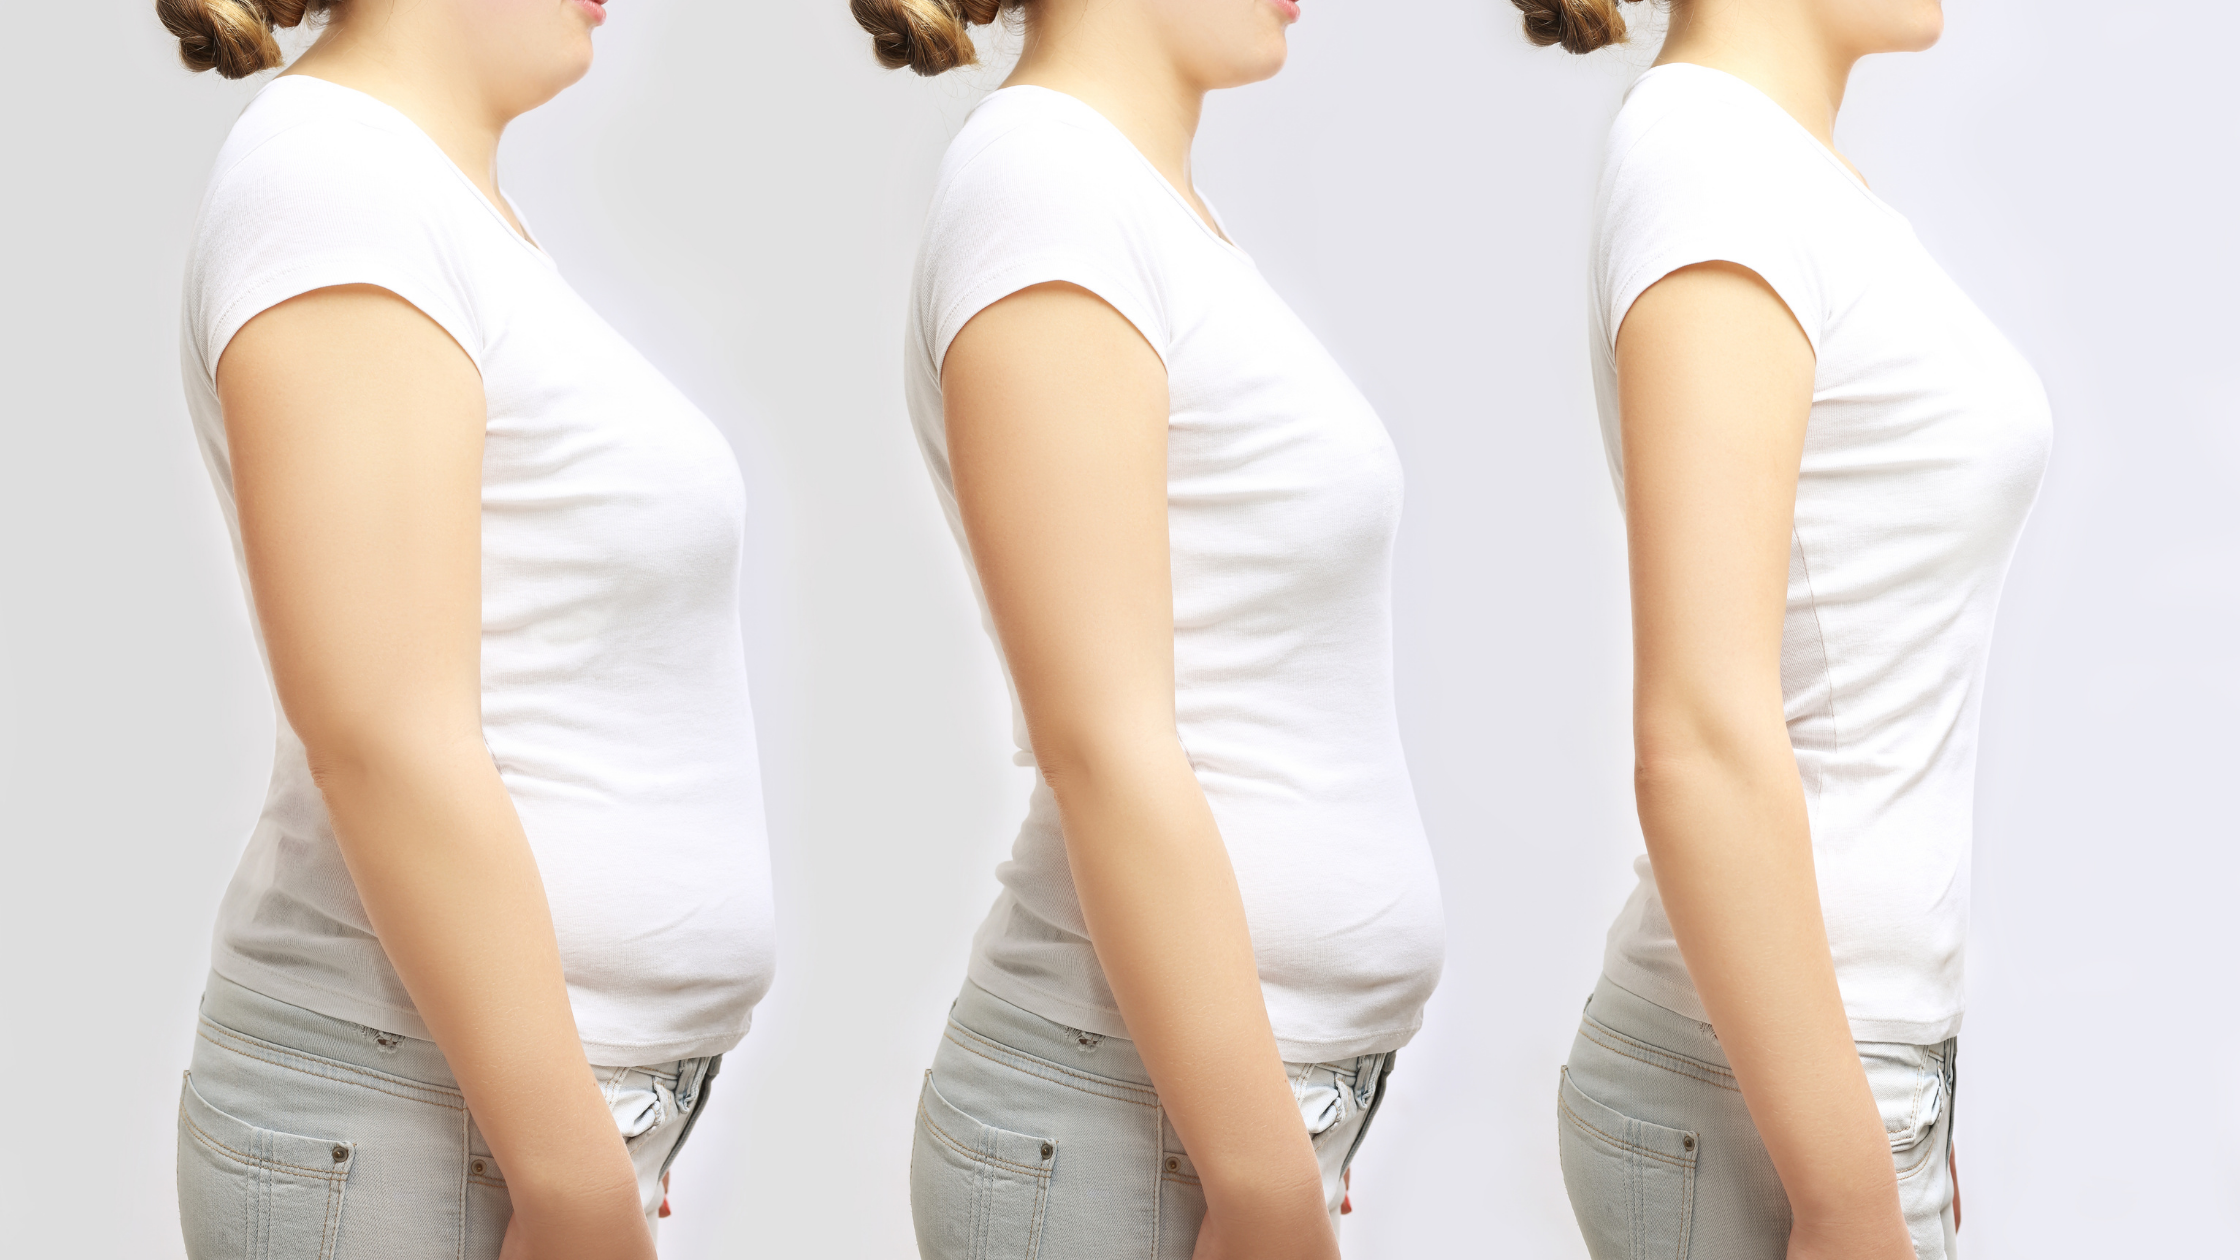 Three images of the same woman, each thinner than the last,  showing weight loss over time